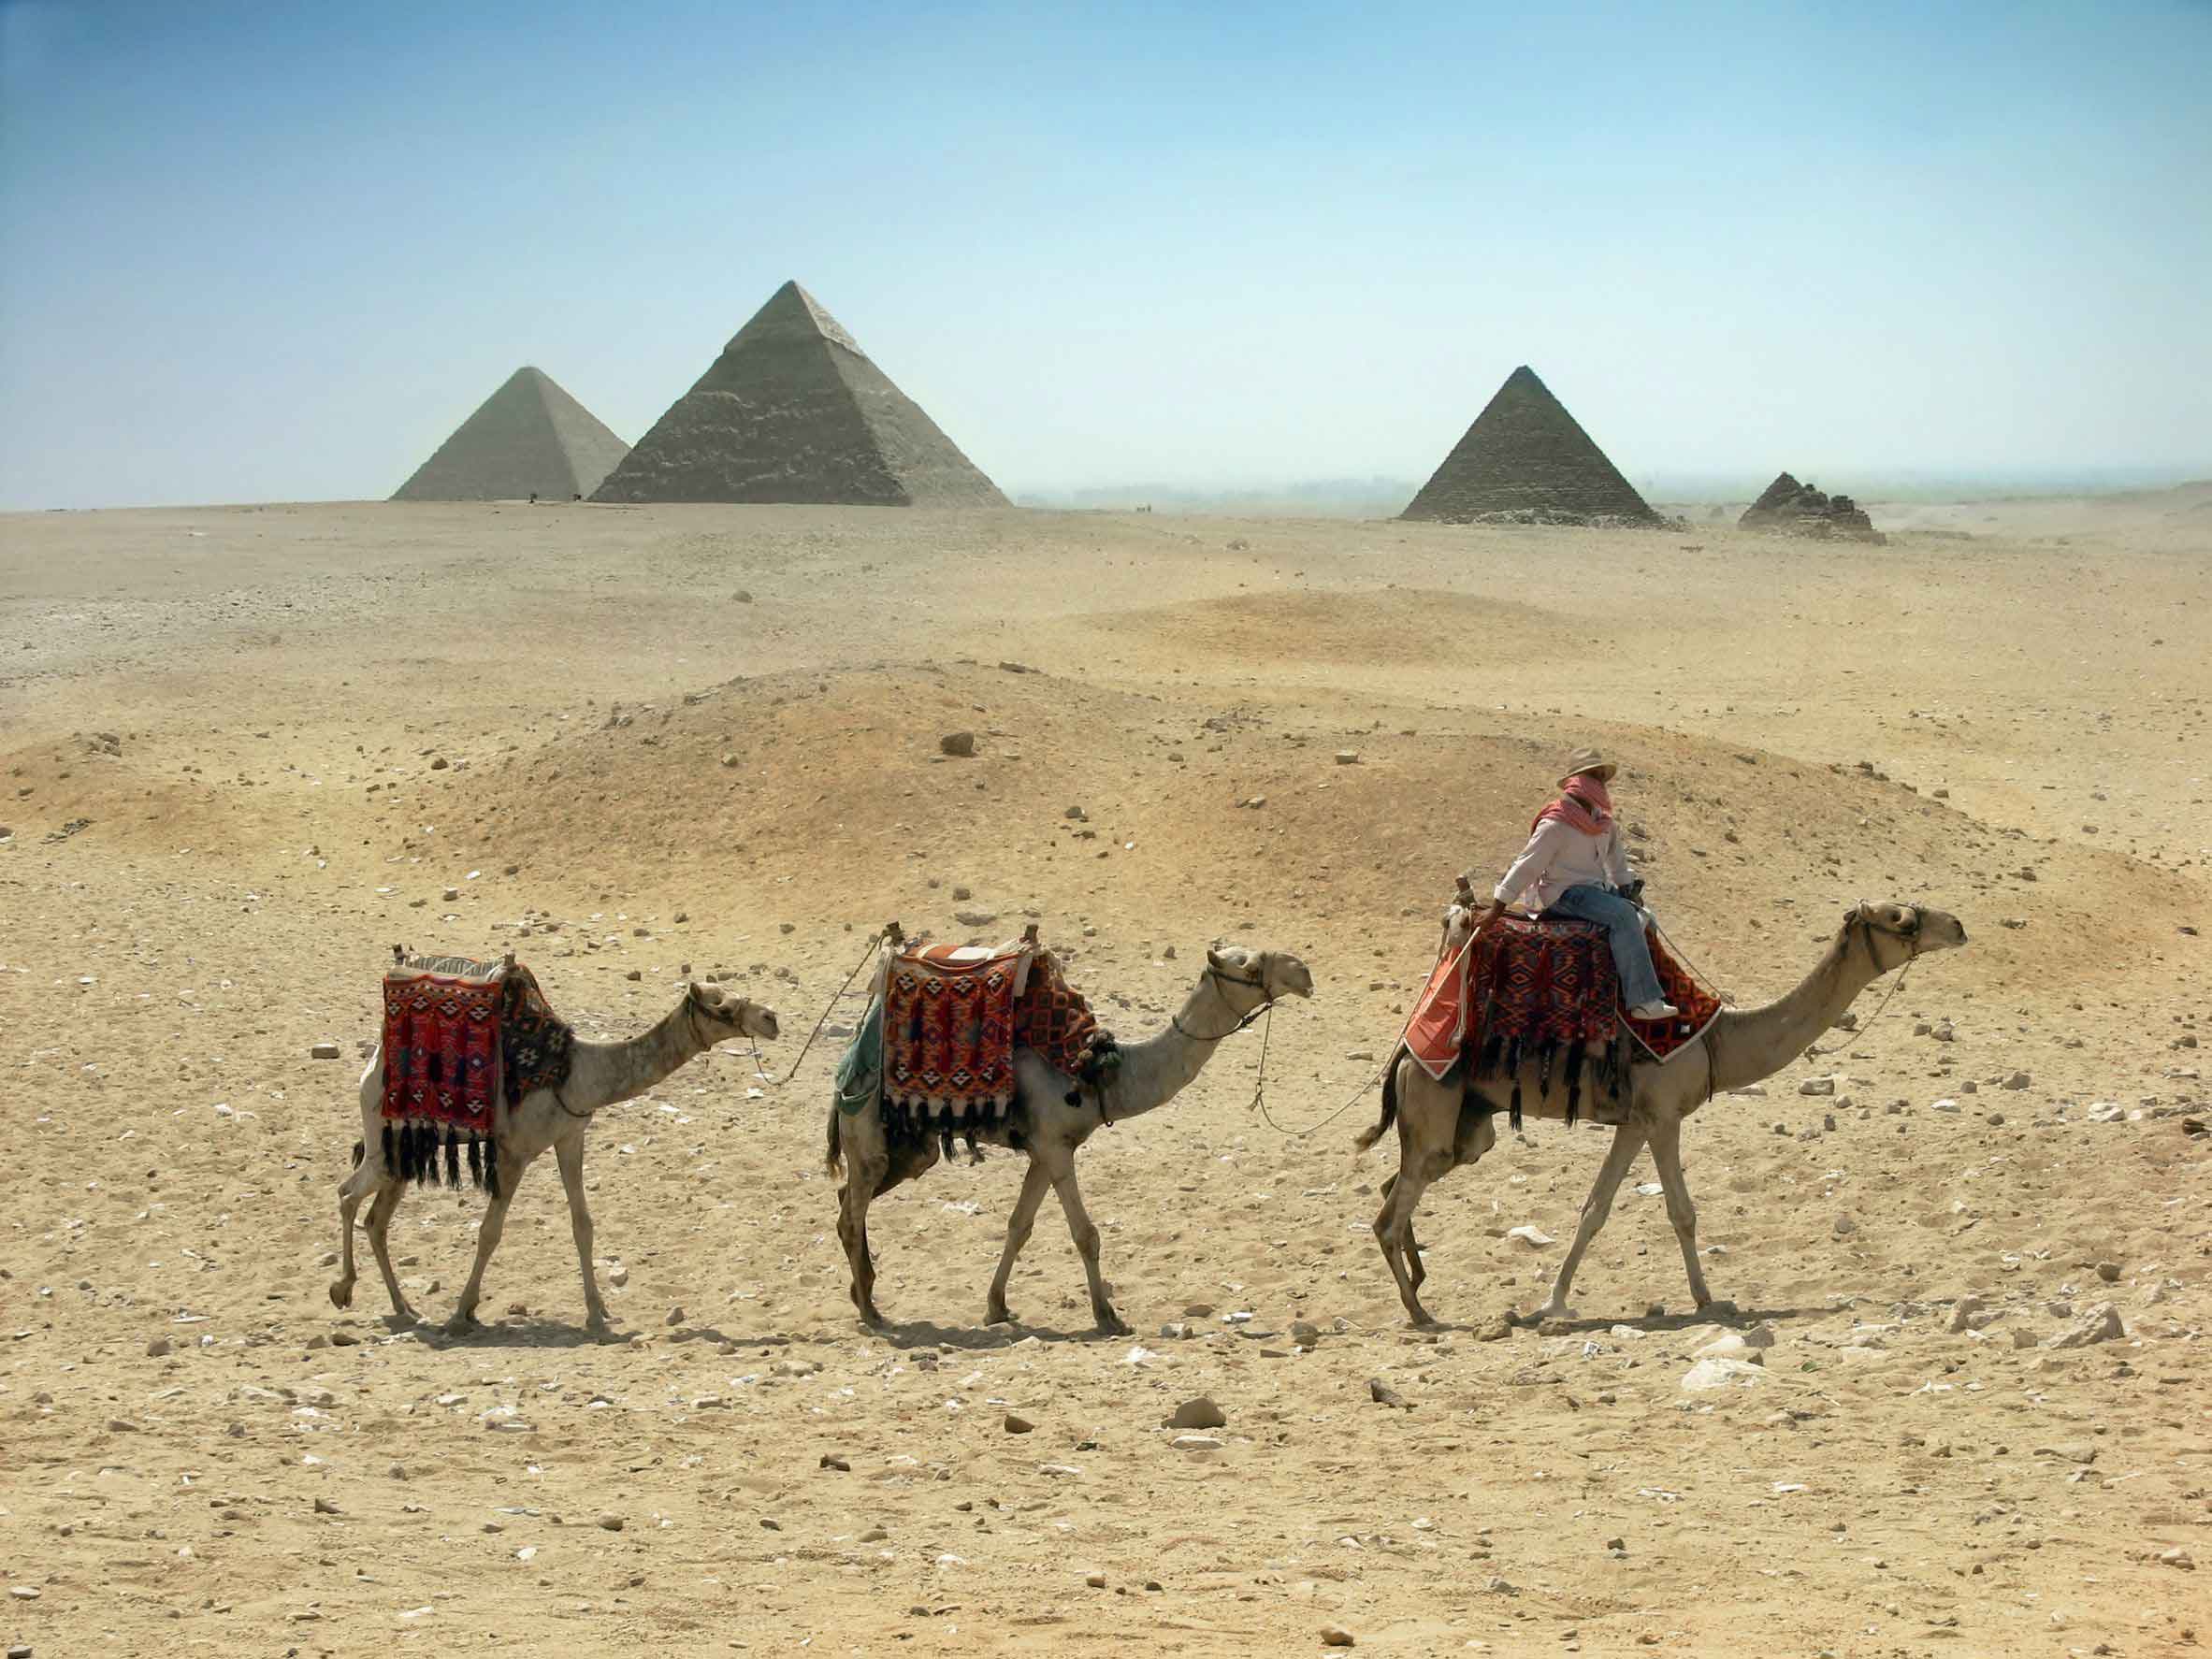 Camels in front of the Great Pyramids of Giza in Cairo, Egypt